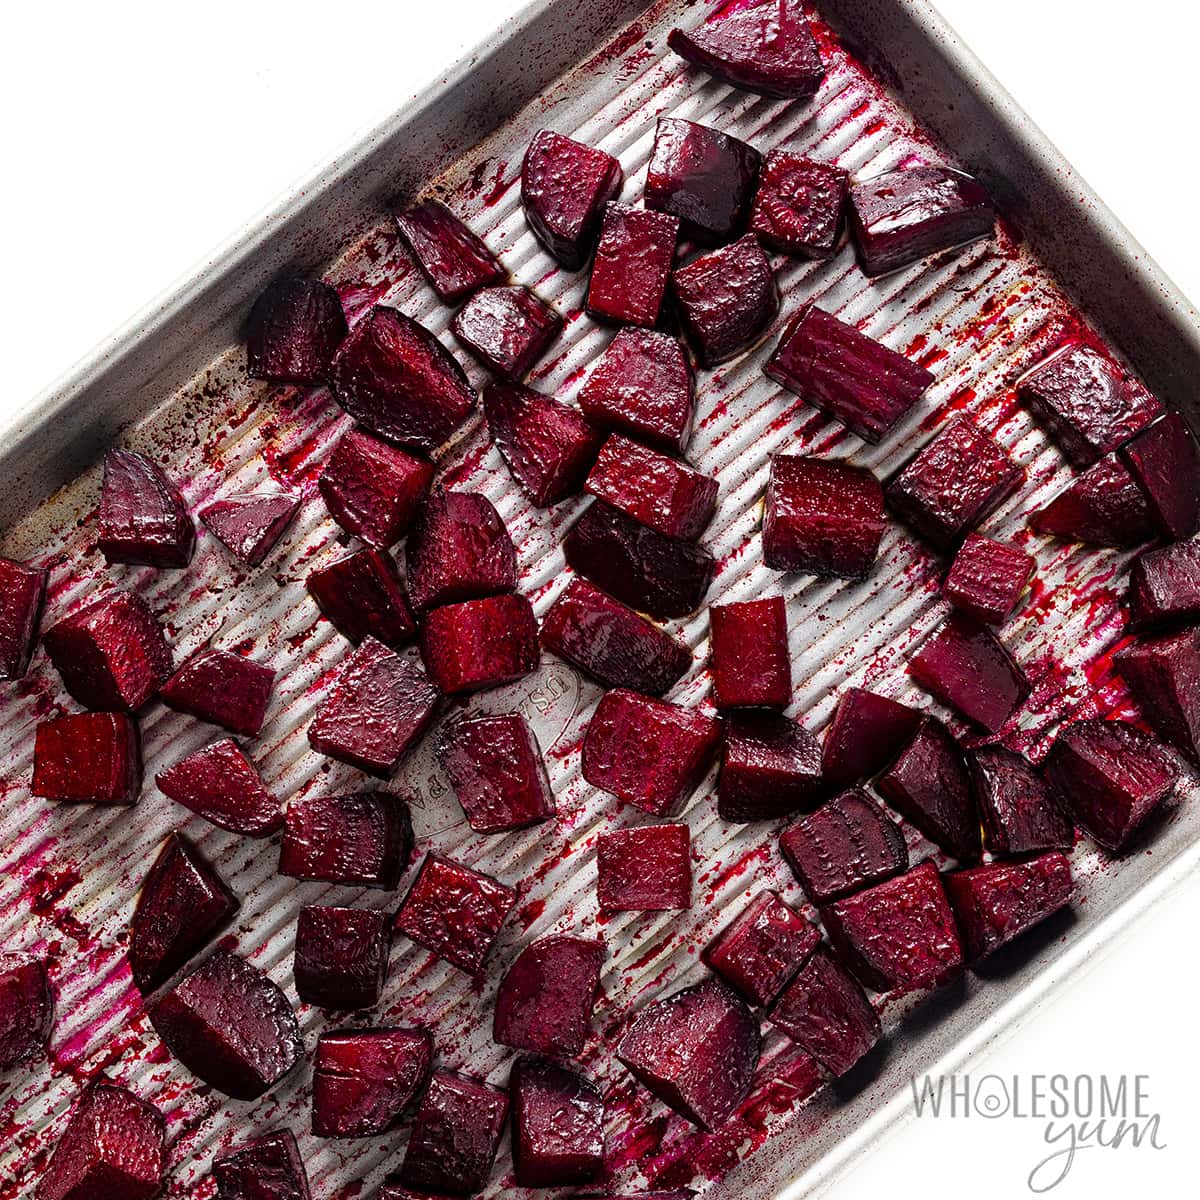 Roasted beets on a baking sheet.